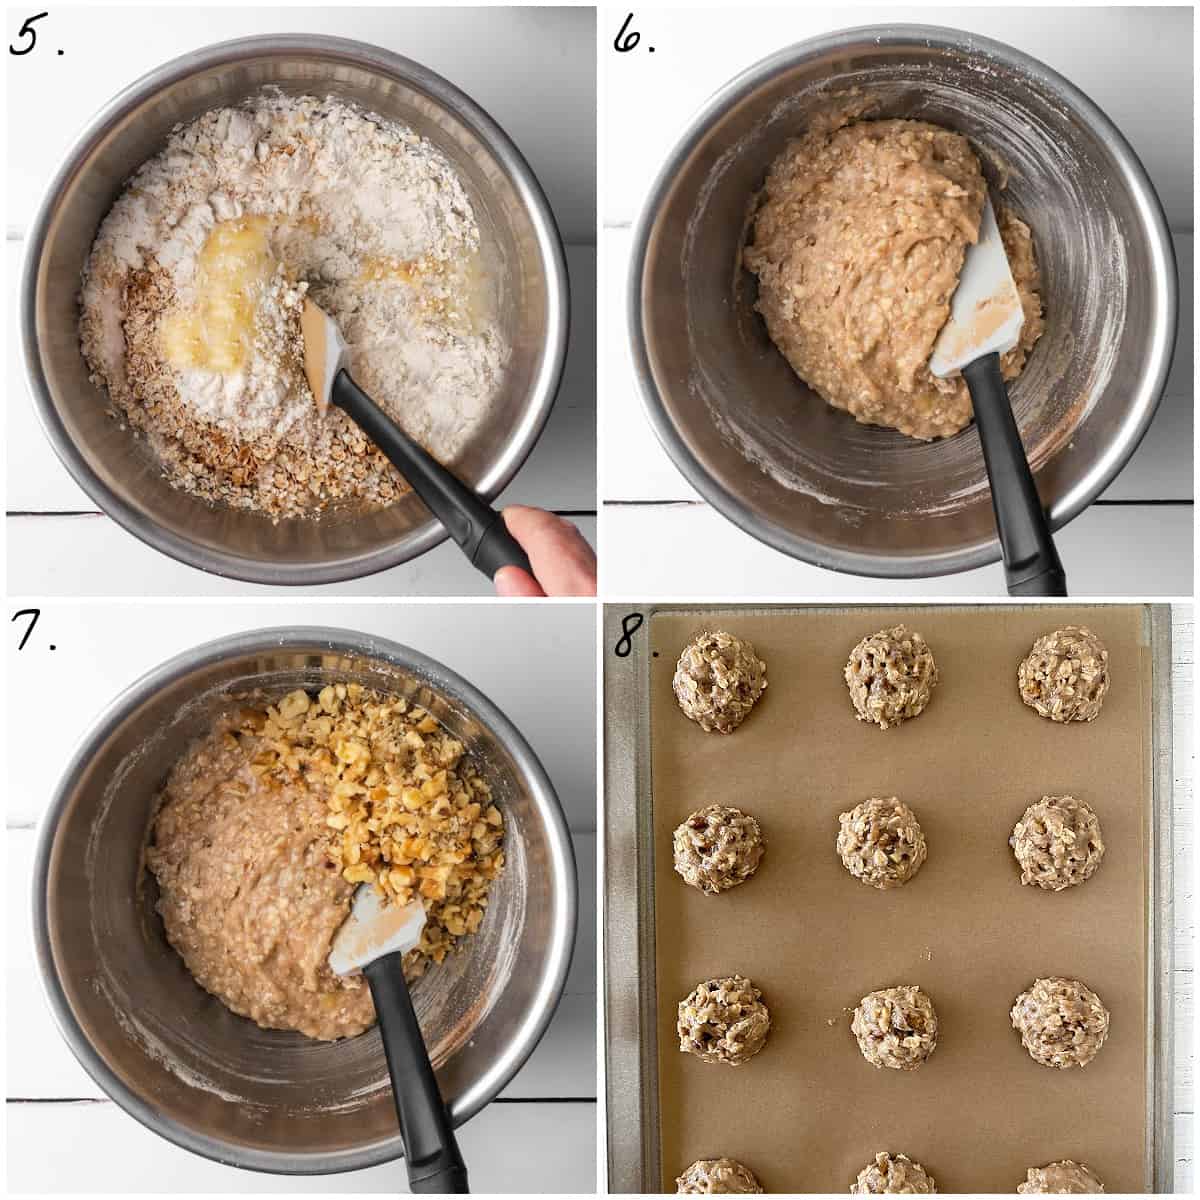 Four process photos showing how to combine the wet and dry ingredients, folding in the walnuts and scooping dough on baking tray. 